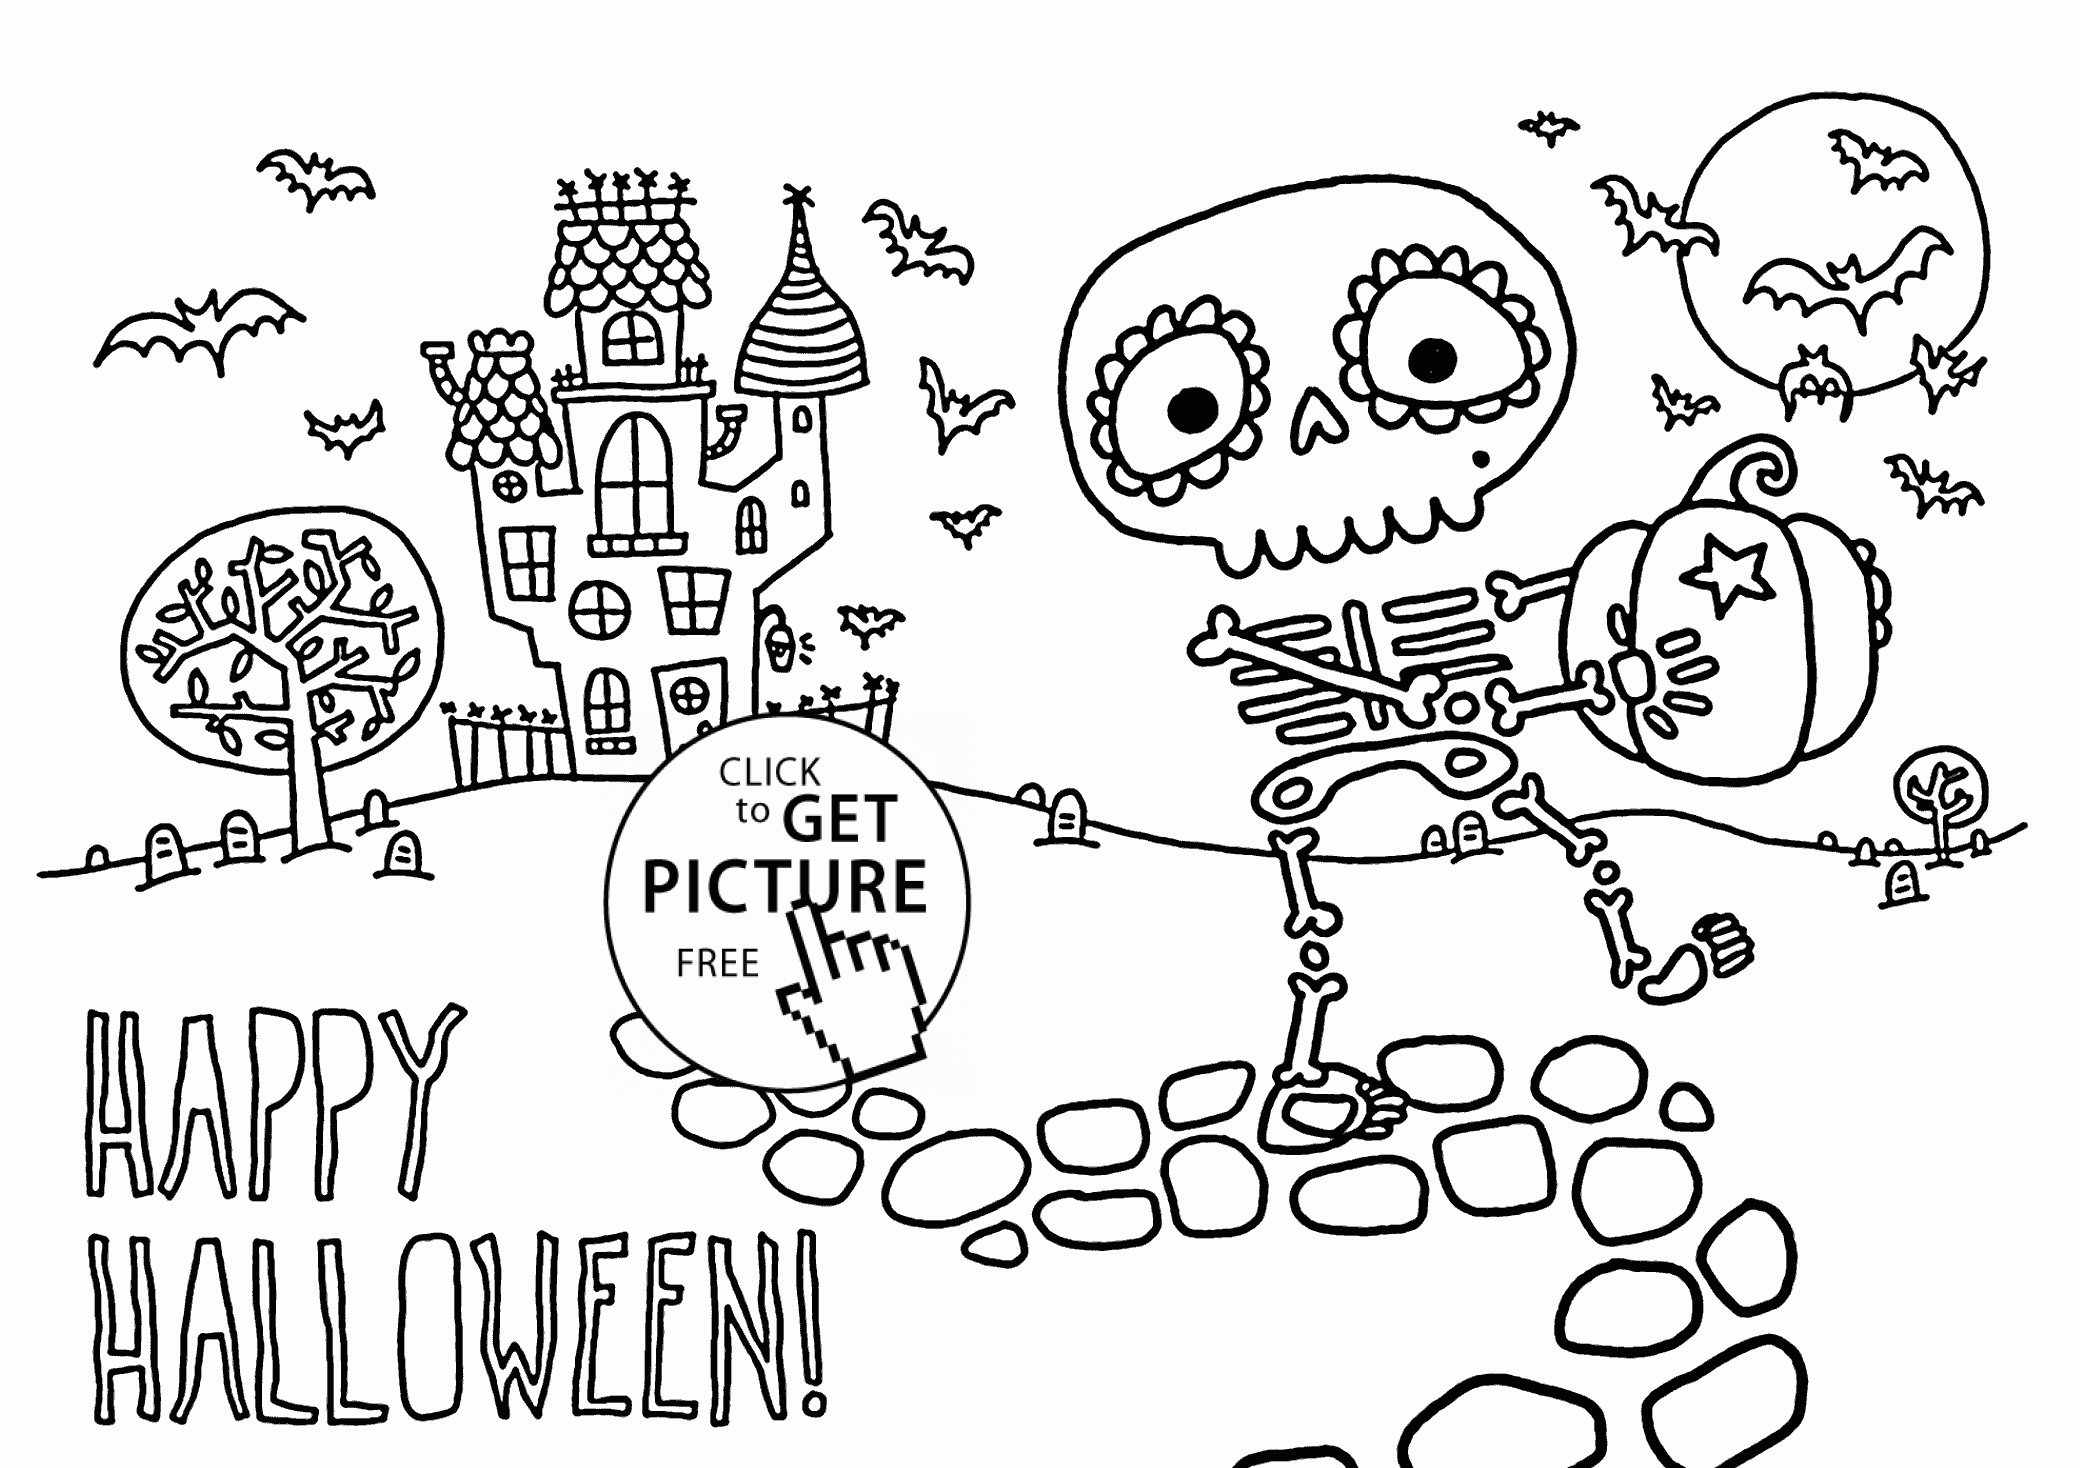 Coloring Pages : Skeleton Coloring Pages Cute For Kids Halloween - Free Printable Skeleton Coloring Pages